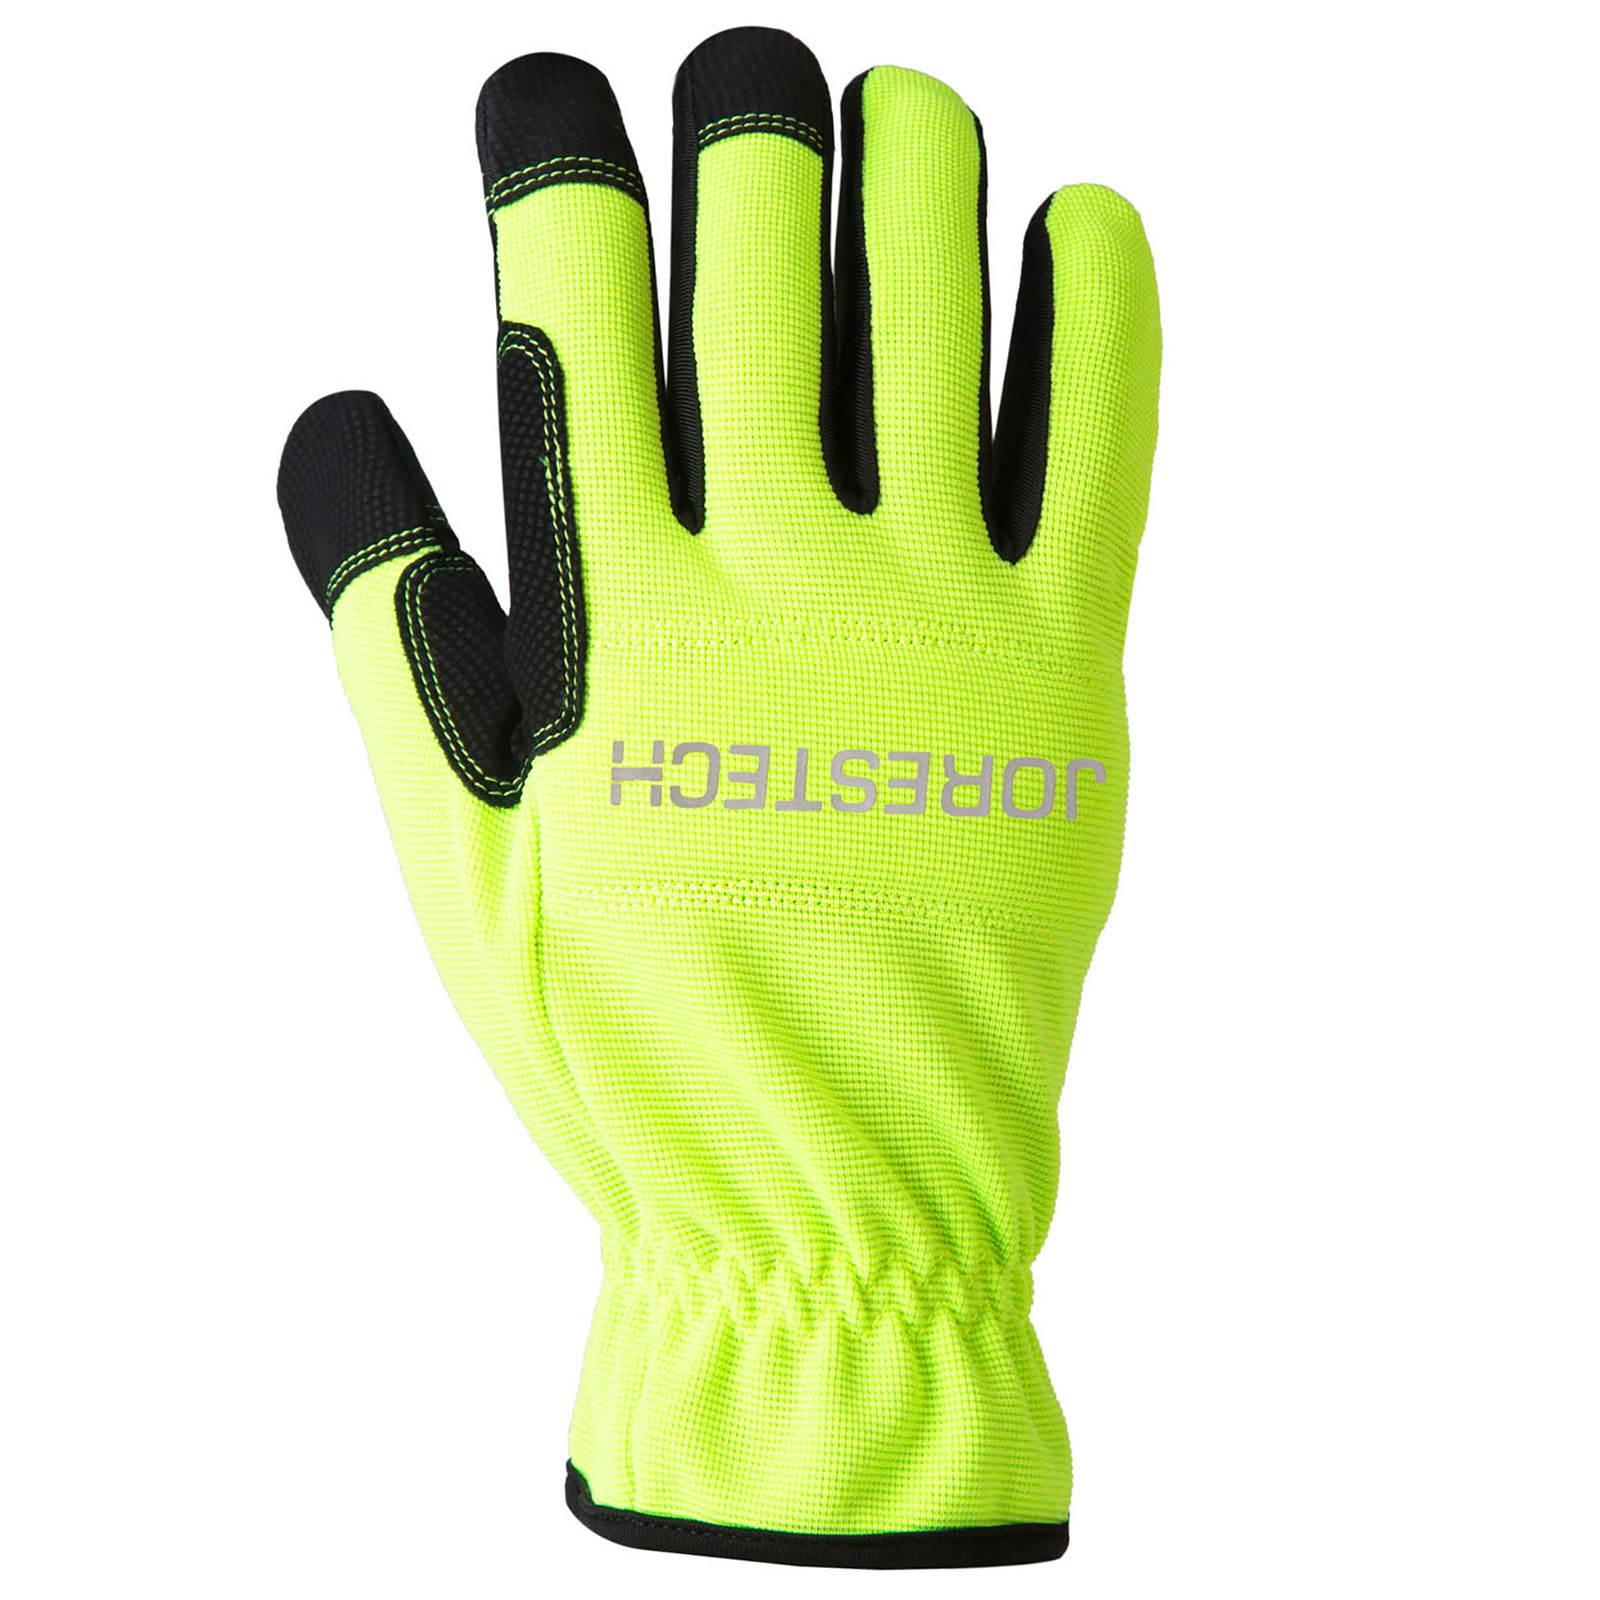 Front view of the lime side of the Hi-vis JORESTECH multipurpose safety glove